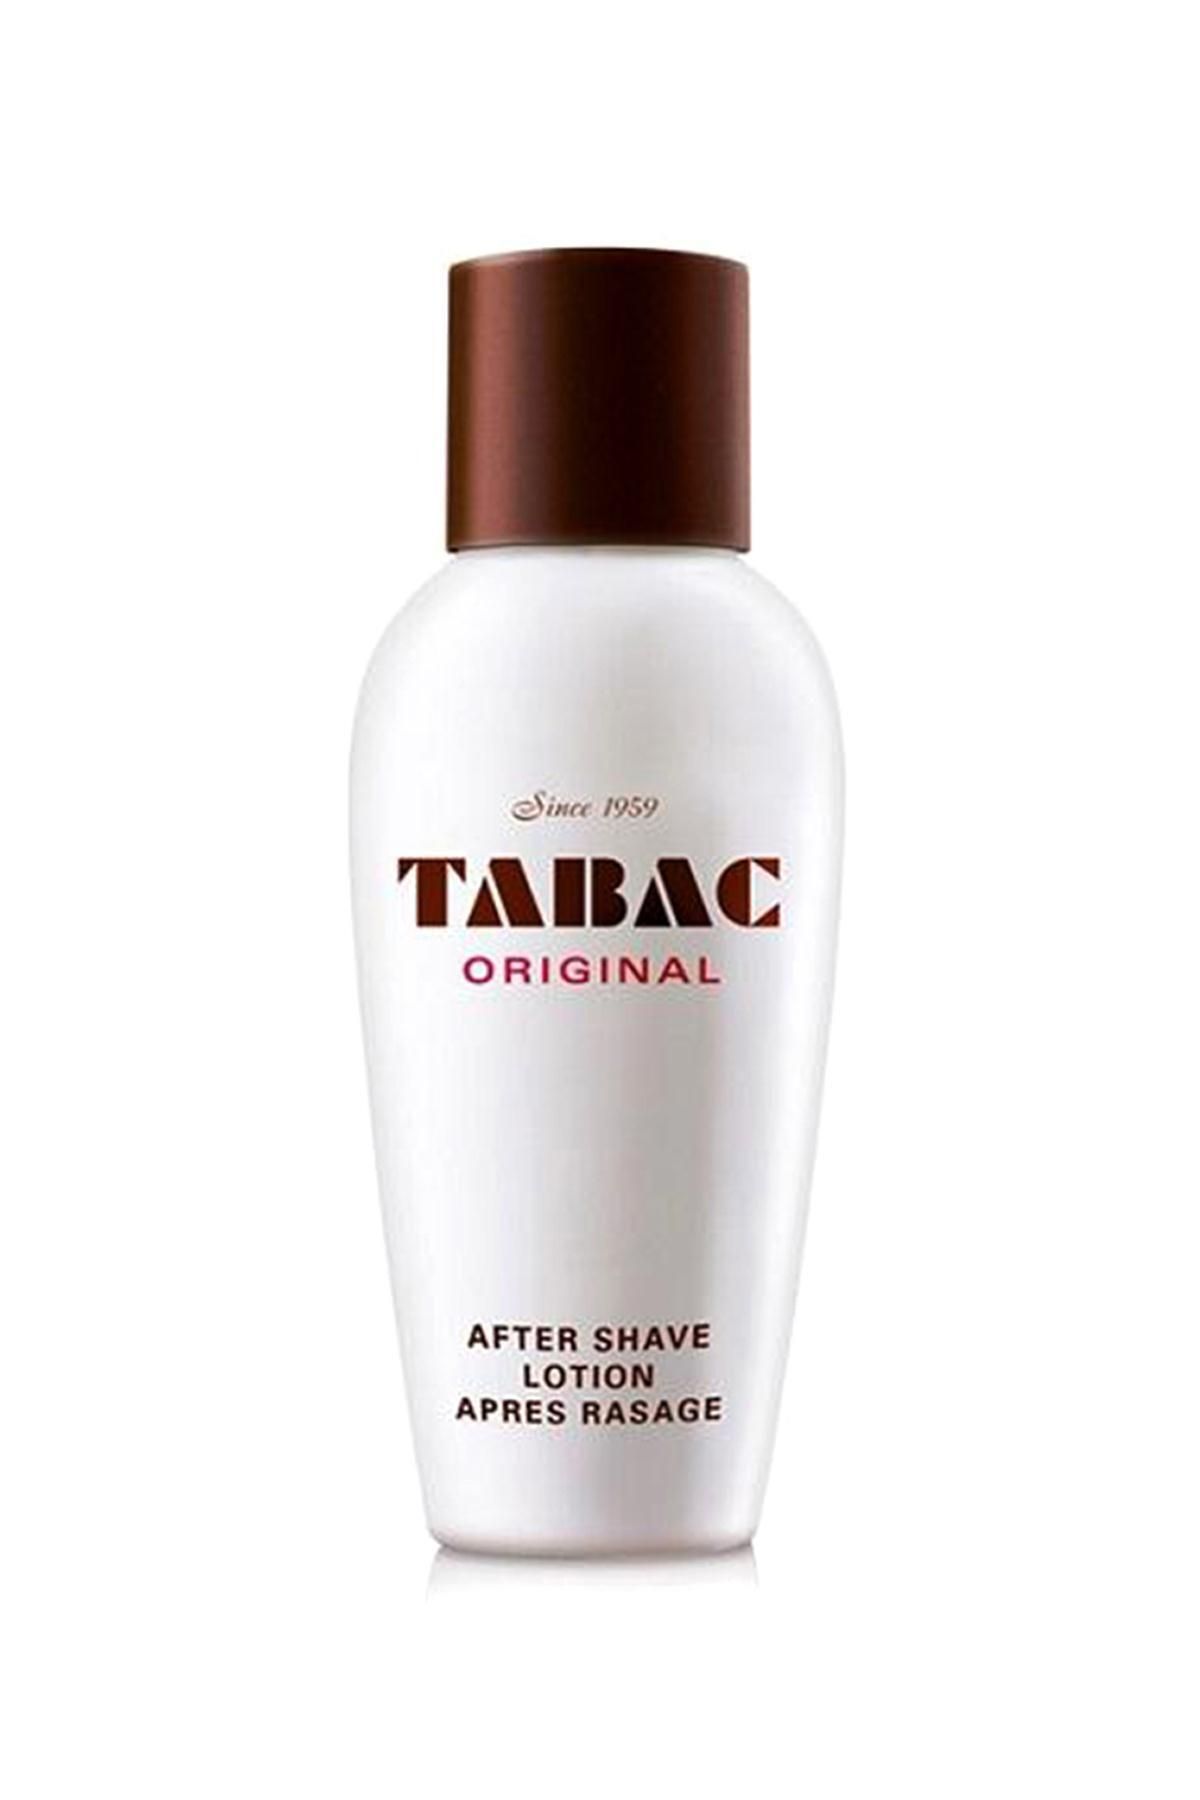 Tabac Original After Shave Lotion 150ml